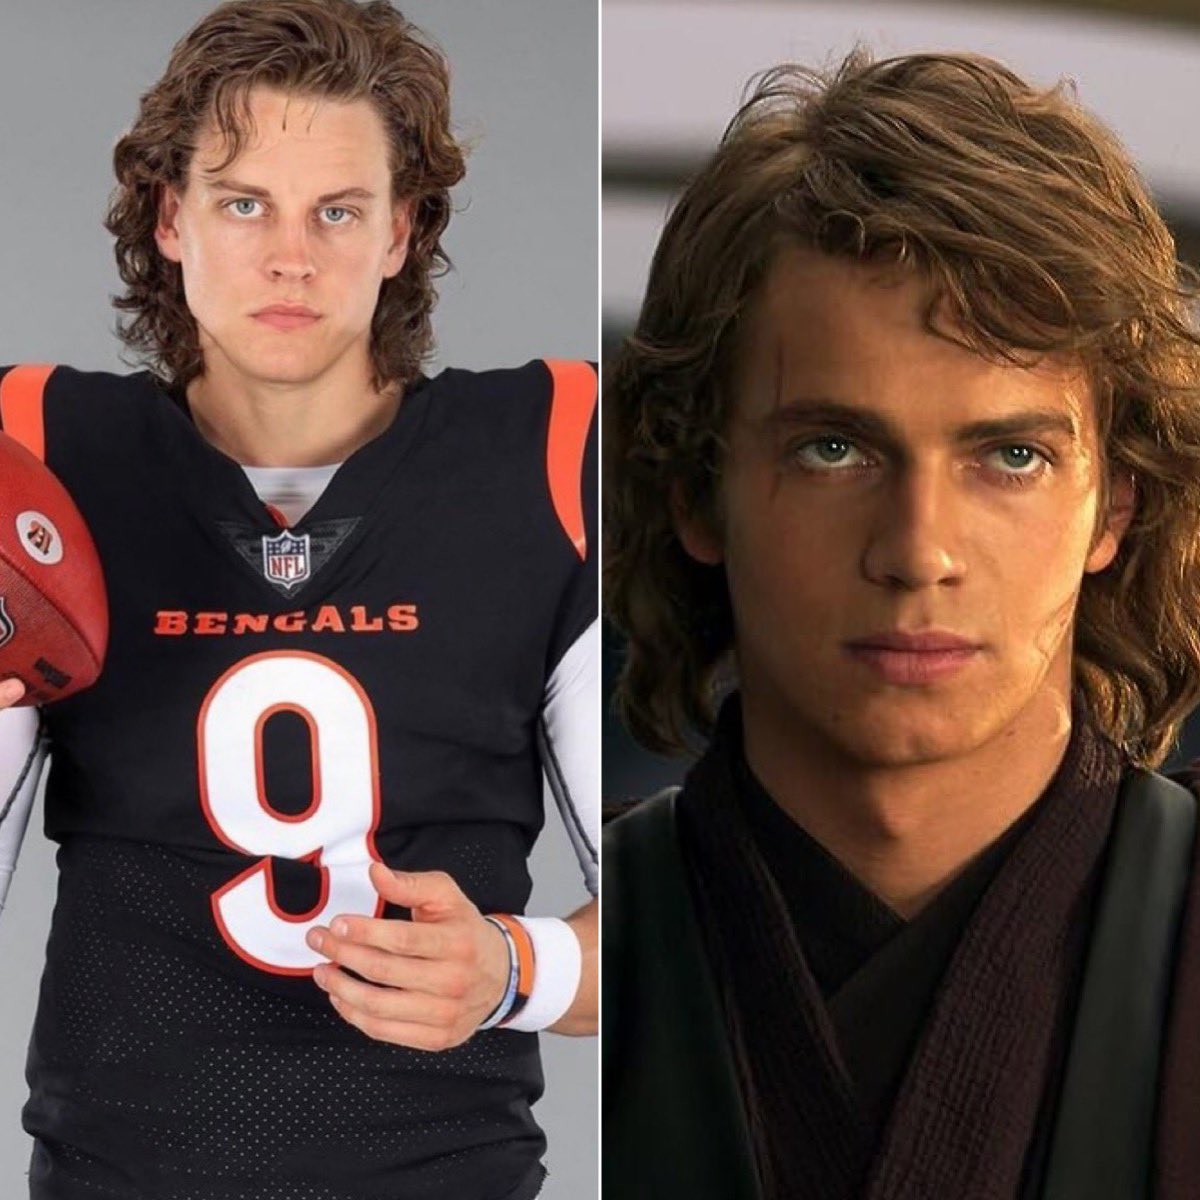 Oh it’s over for any younglings in Cincinnati 💀